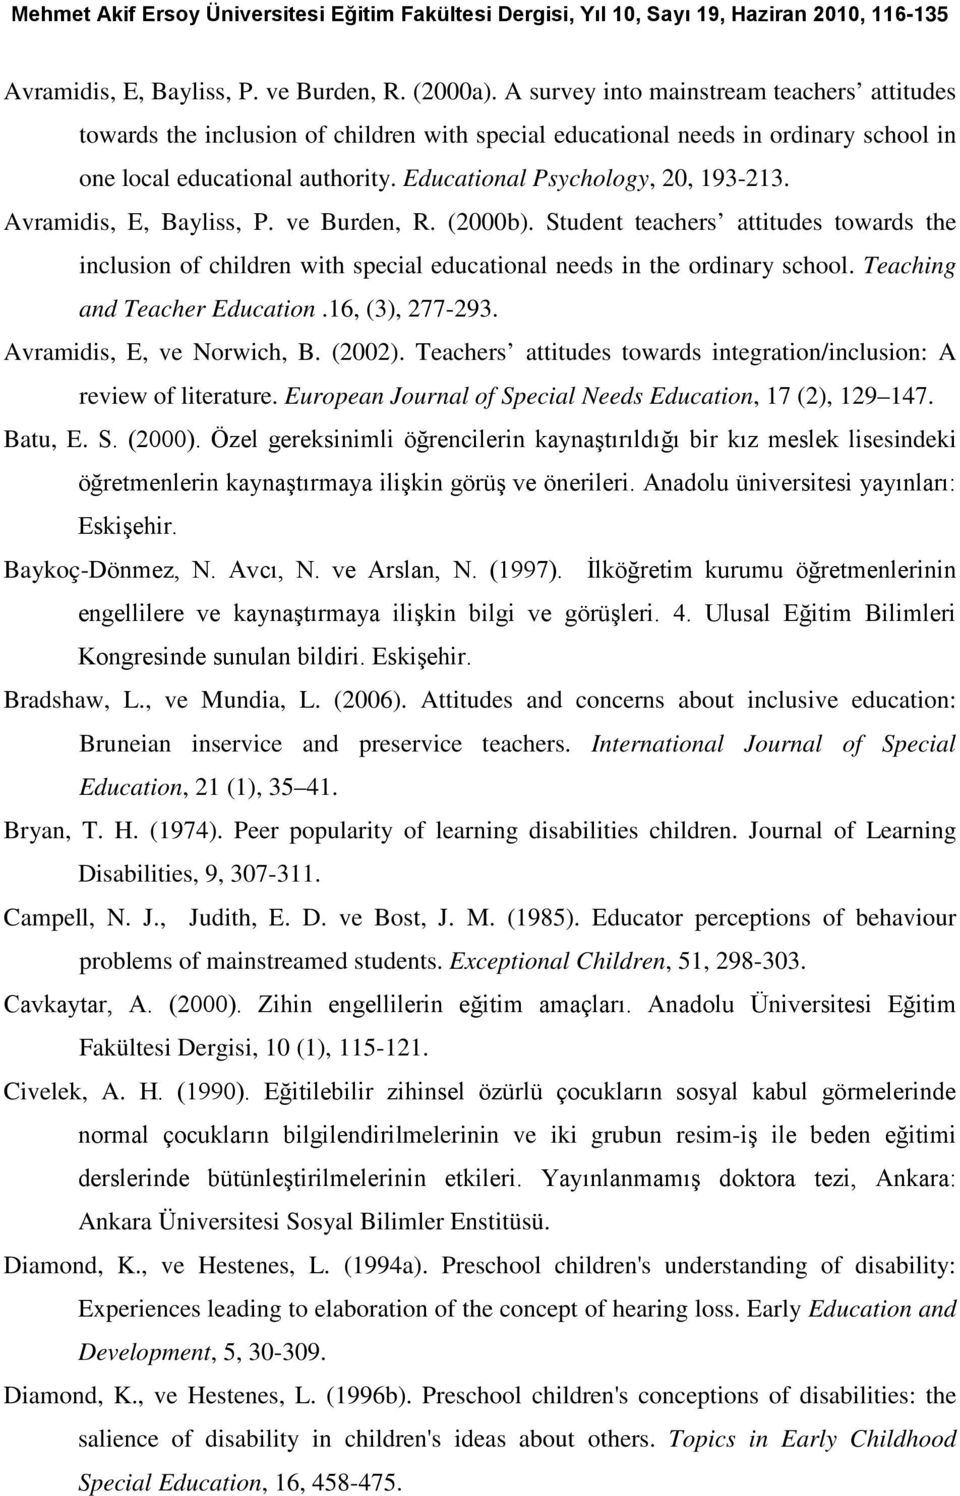 Avramidis, E, Bayliss, P. ve Burden, R. (2000b). Student teachers attitudes towards the inclusion of children with special educational needs in the ordinary school. Teaching and Teacher Education.